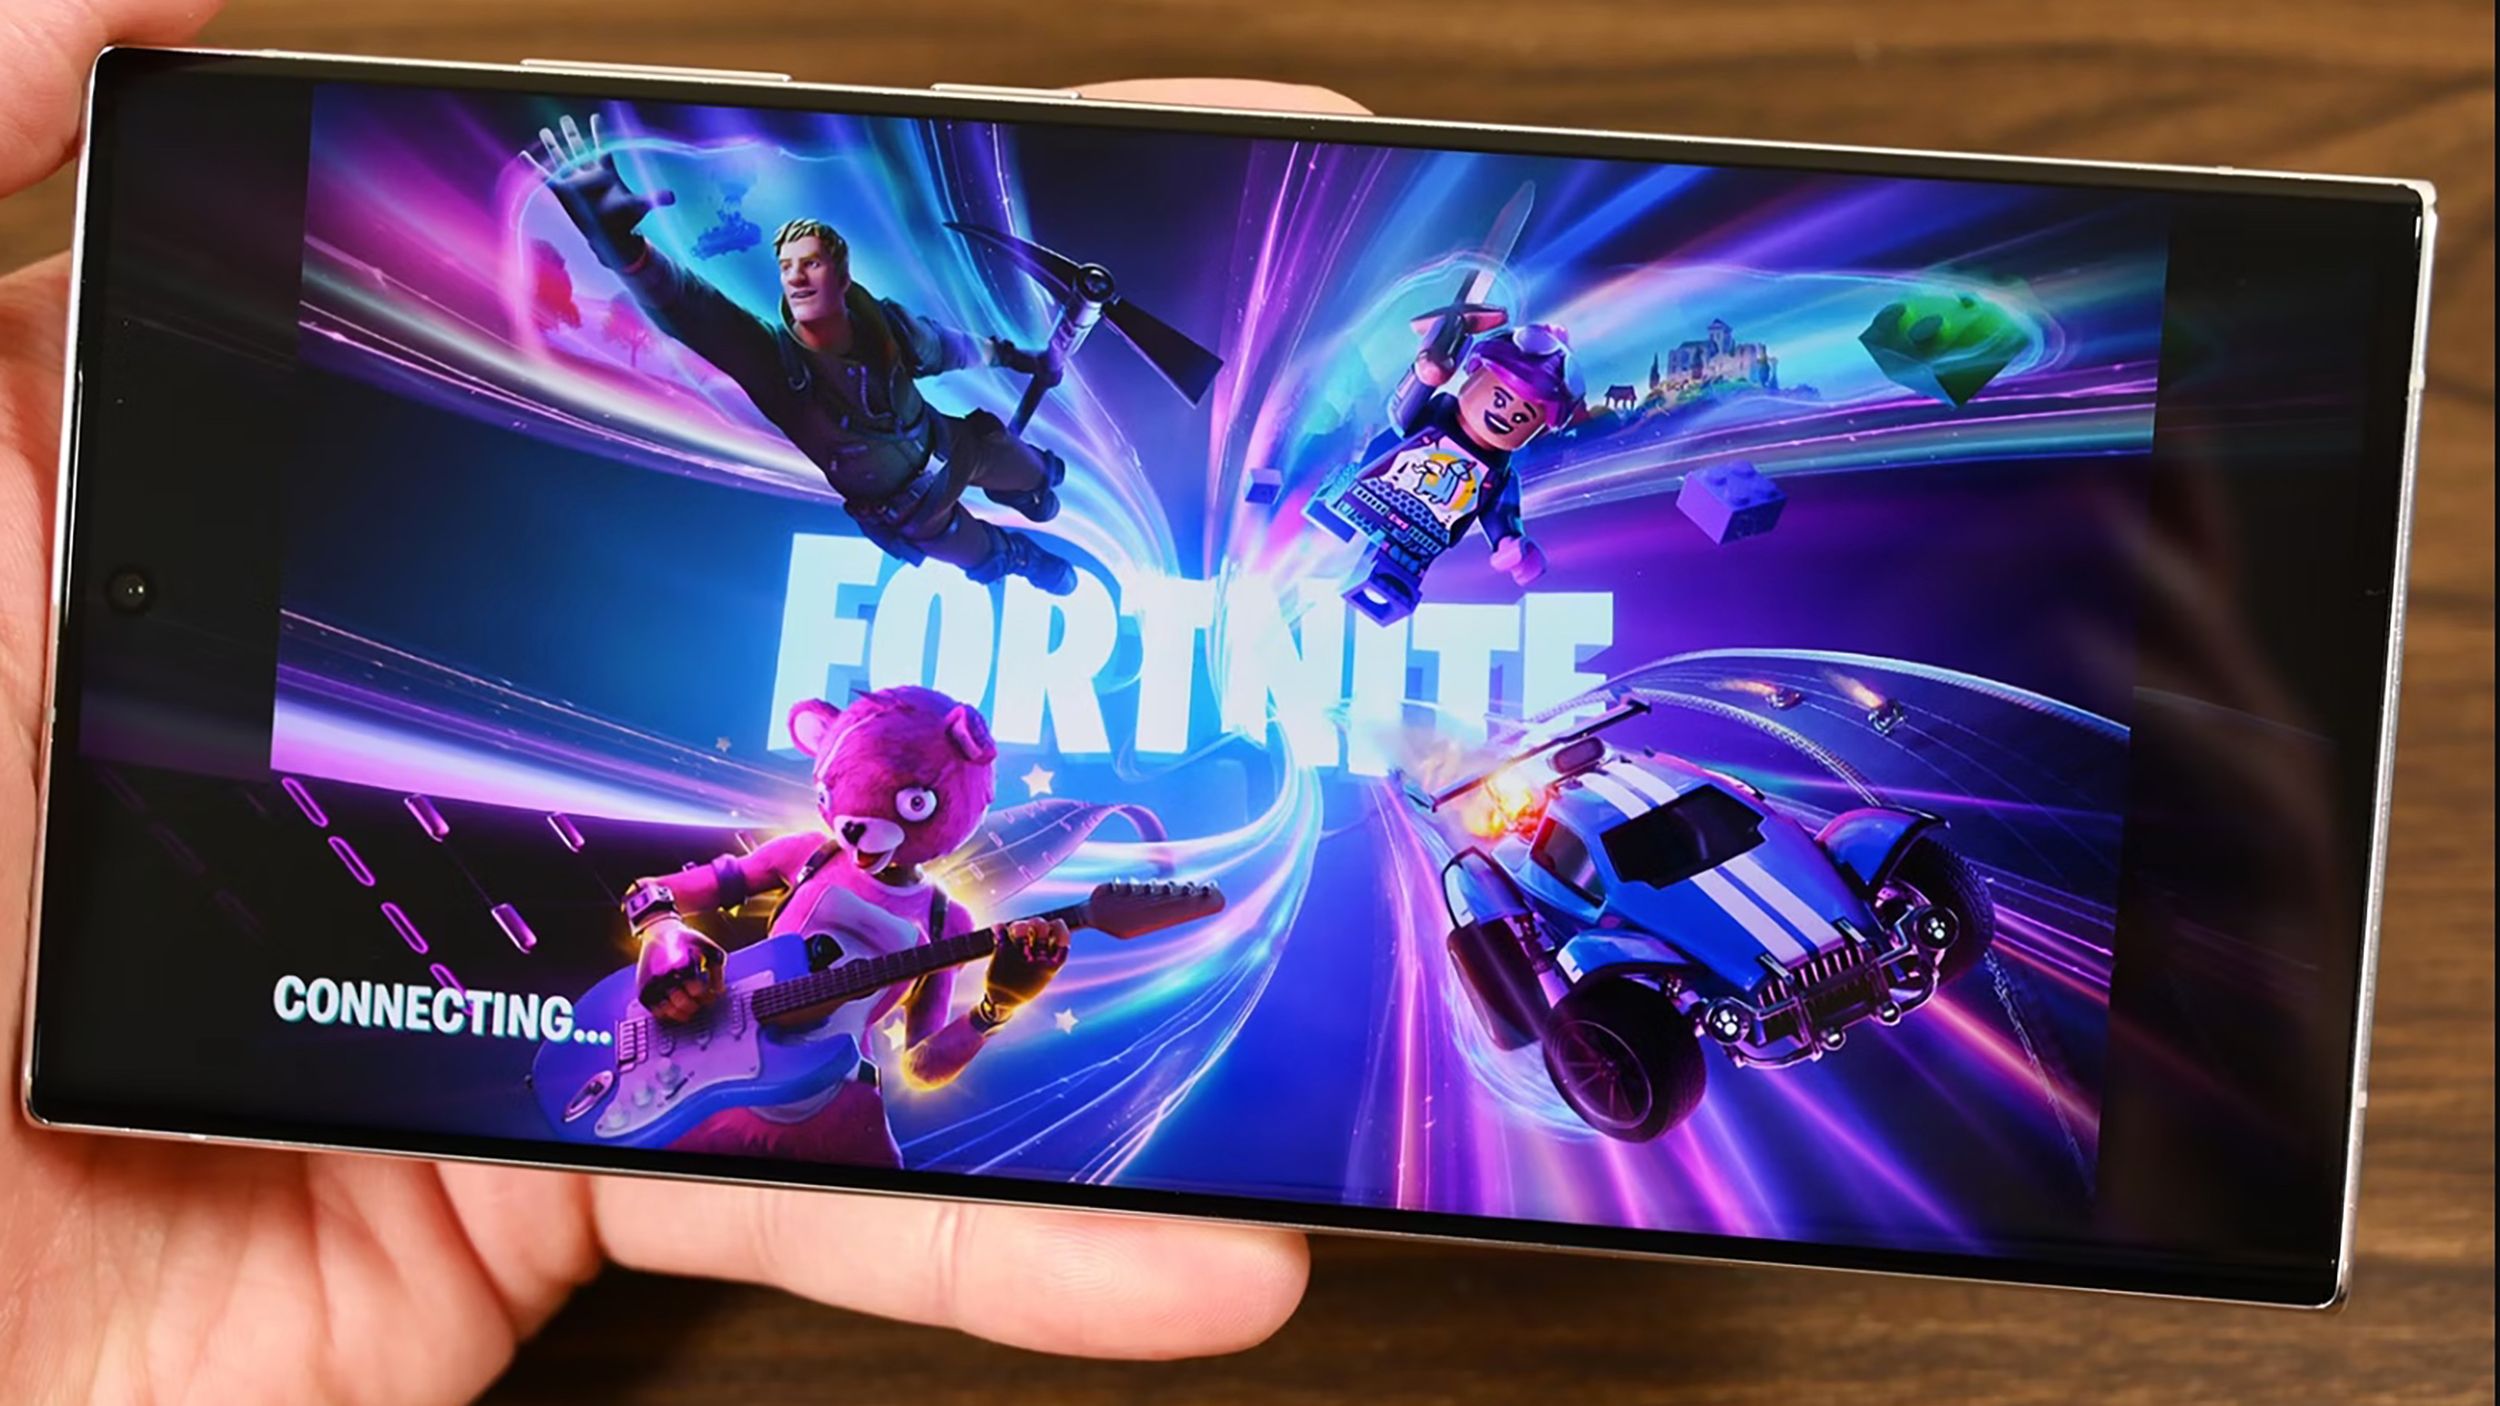 Immersive world that combines Disney brands with Fortnite